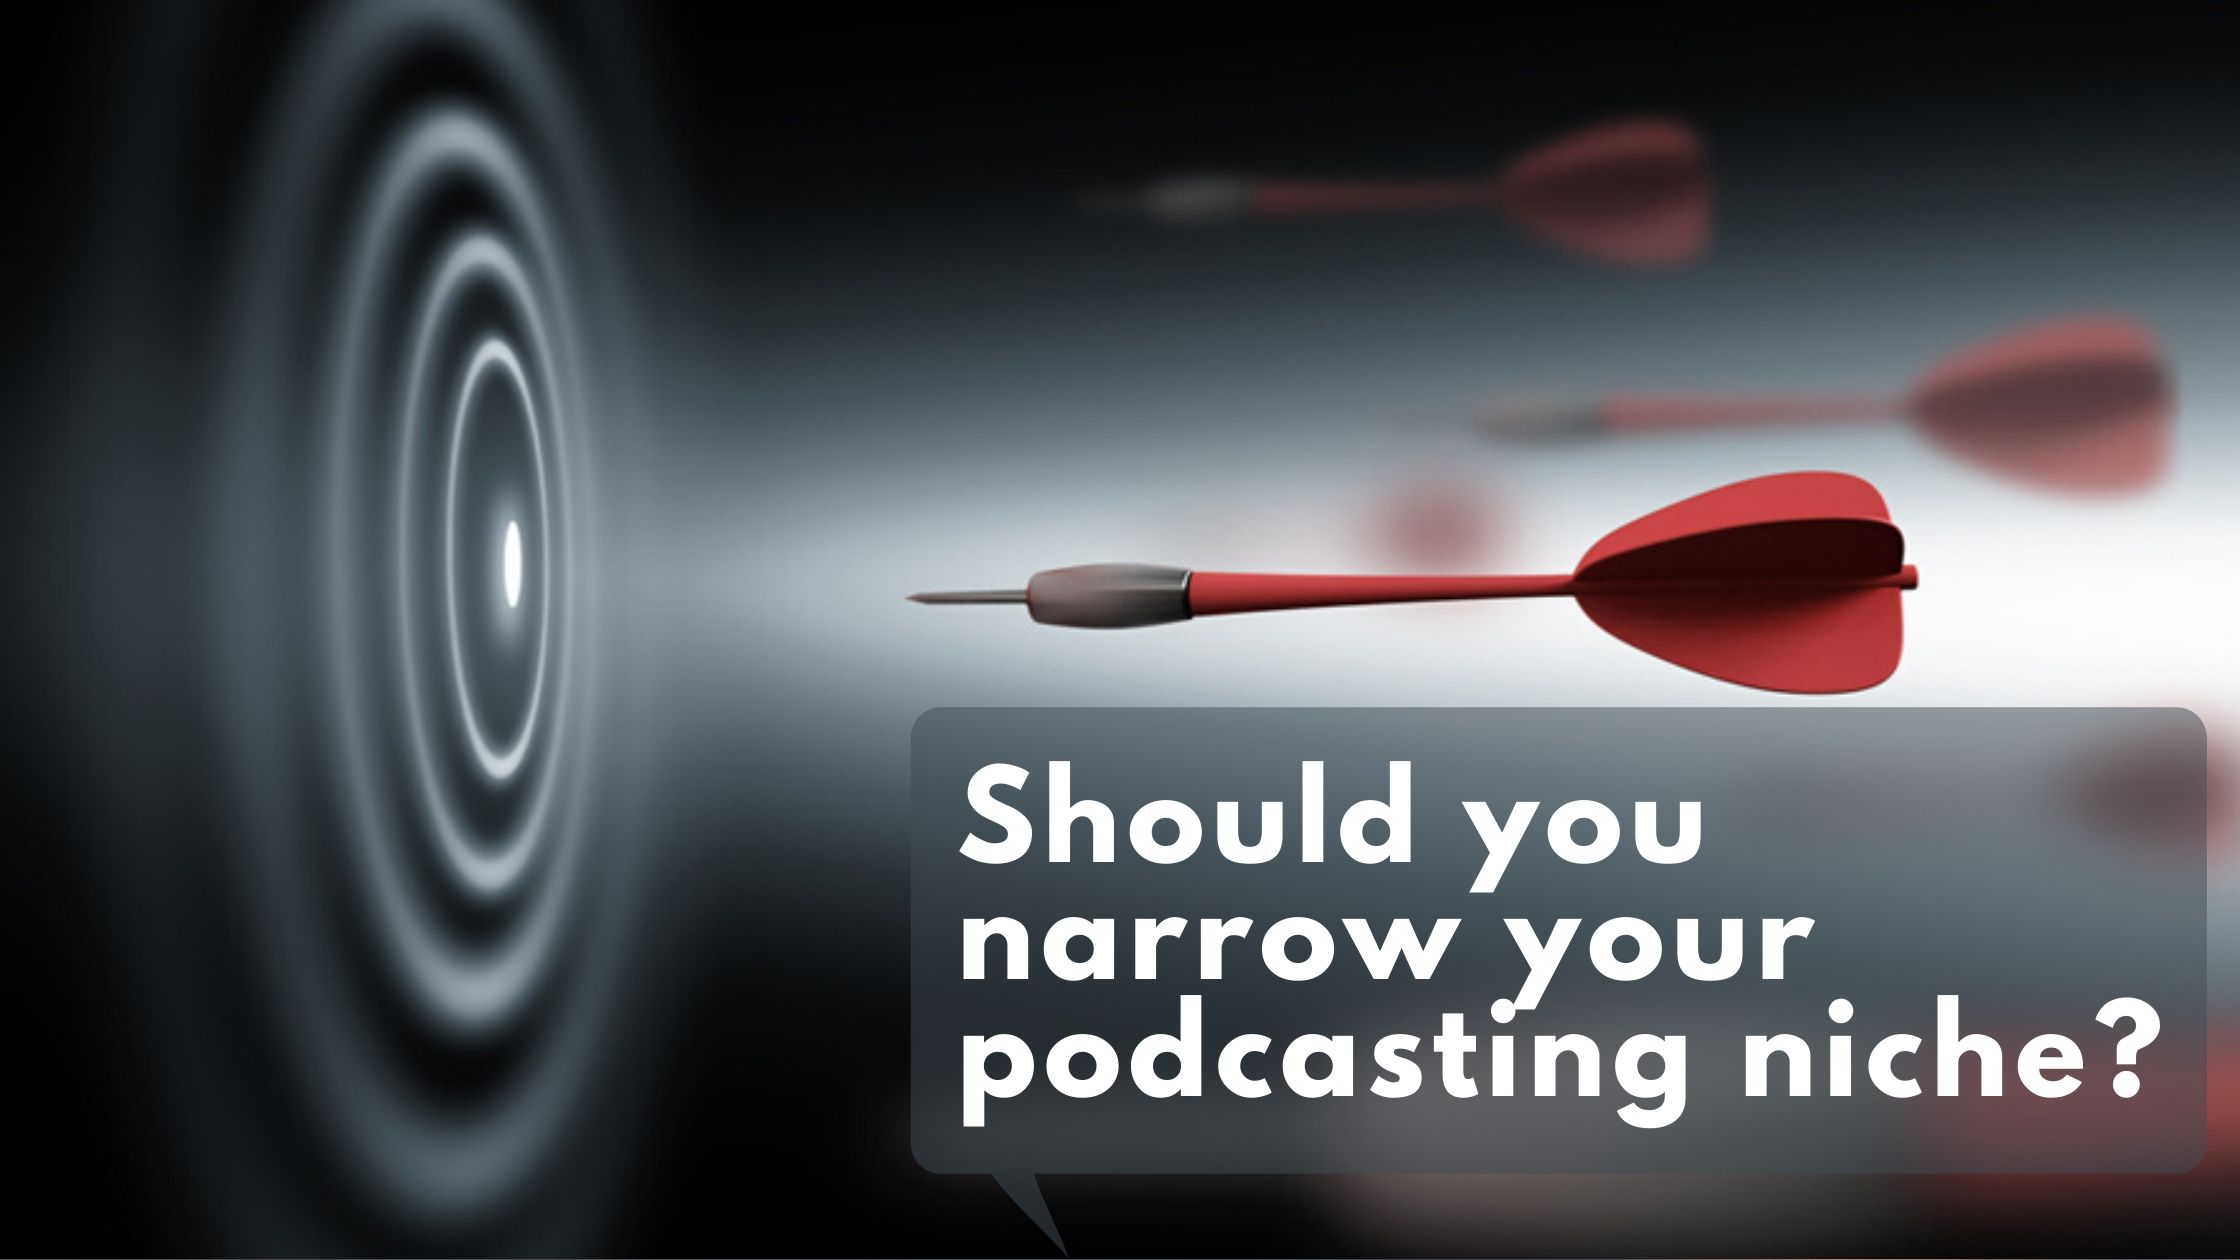 Should you narrow your podcasting niche?